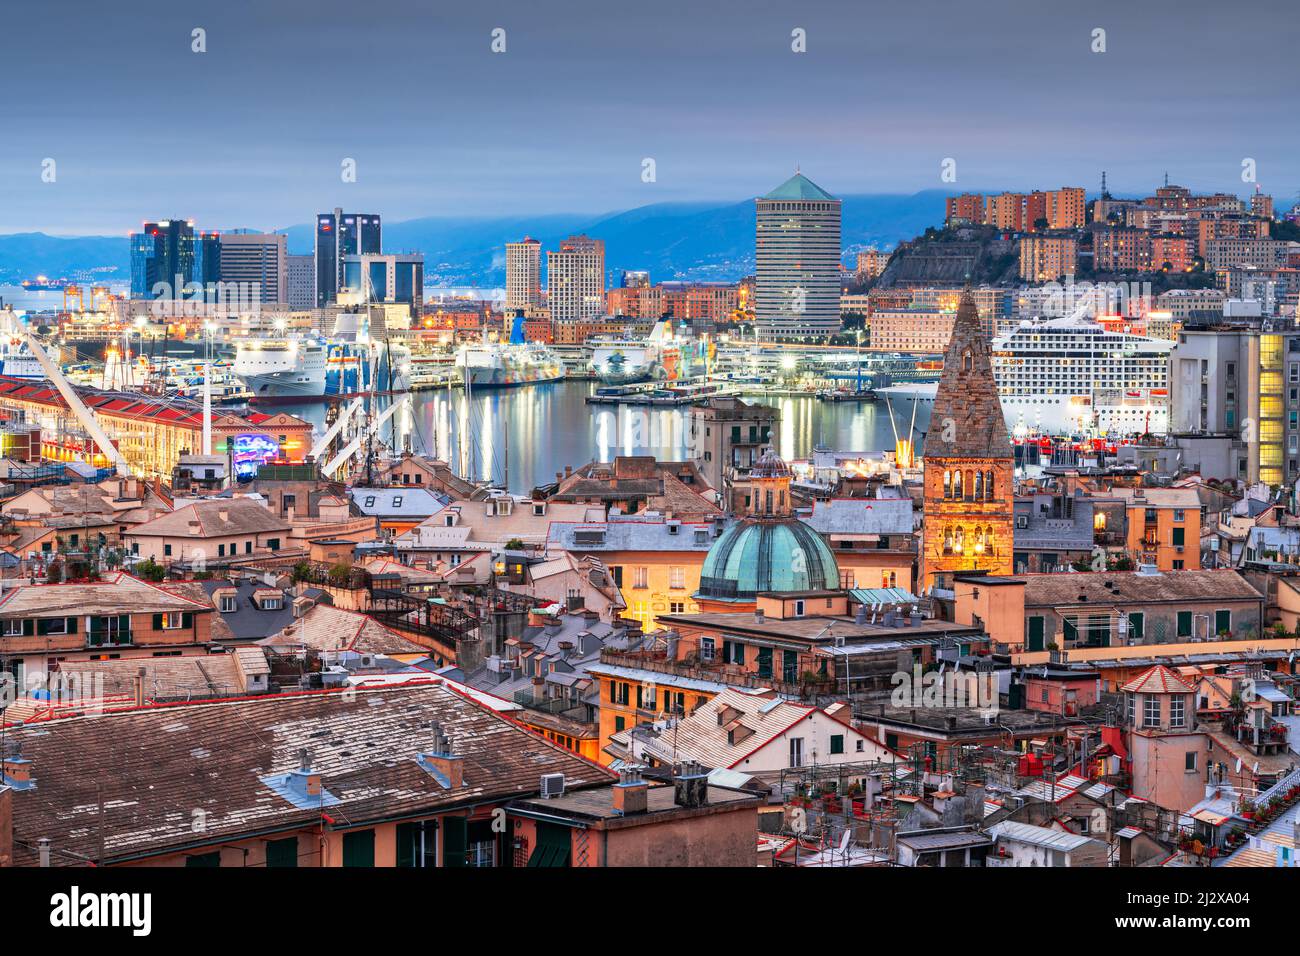 Genova, Italy downtown skyline with historic towers at dusk. Stock Photo